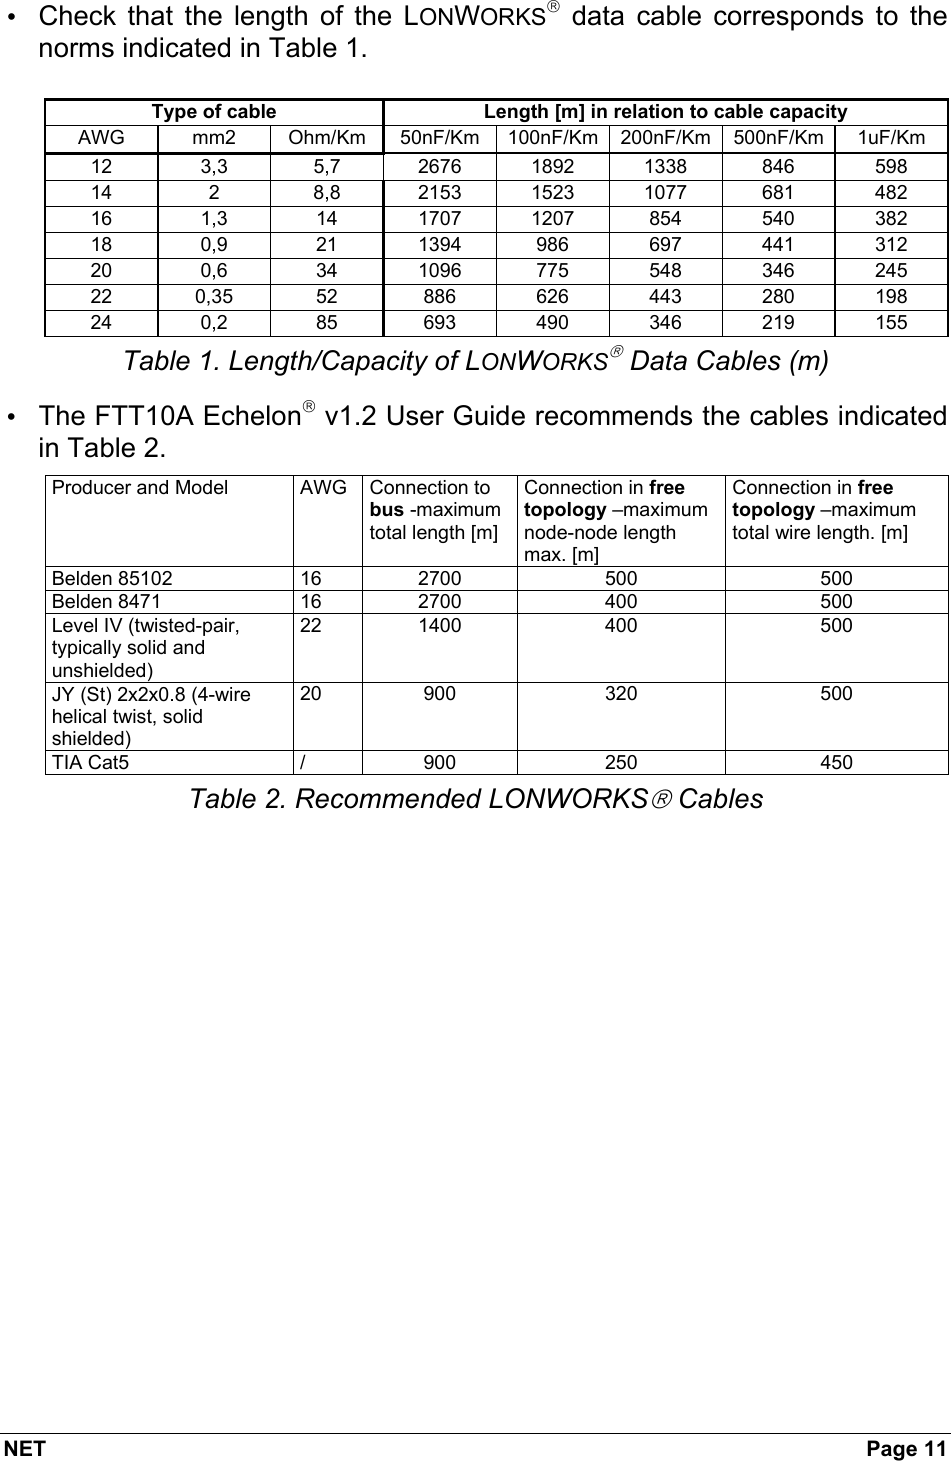 NET  Page 11 • Check that the length of the LONWORKS data cable corresponds to the norms indicated in Table 1.  Type of cable  Length [m] in relation to cable capacity AWG mm2 Ohm/Km 50nF/Km 100nF/Km 200nF/Km 500nF/Km 1uF/Km 12 3,3 5,7 2676 1892 1338 846 598 14 2 8,8 2153 1523 1077 681 482 16  1,3  14 1707 1207 854 540 382 18  0,9  21 1394 986 697 441 312 20  0,6  34 1096 775 548 346 245 22 0,35 52 886 626 443 280 198 24 0,2 85 693 490 346 219 155 Table 1. Length/Capacity of LONWORKS Data Cables (m) • The FTT10A Echelon v1.2 User Guide recommends the cables indicated in Table 2. Producer and Model  AWG  Connection to bus -maximum total length [m] Connection in free topology –maximum node-node length max. [m] Connection in free topology –maximum total wire length. [m] Belden 85102  16  2700  500  500 Belden 8471  16  2700  400  500 Level IV (twisted-pair, typically solid and unshielded) 22 1400  400  500 JY (St) 2x2x0.8 (4-wire helical twist, solid shielded) 20 900  320  500 TIA Cat5  /  900  250  450 Table 2. Recommended LONWORKS Cables 